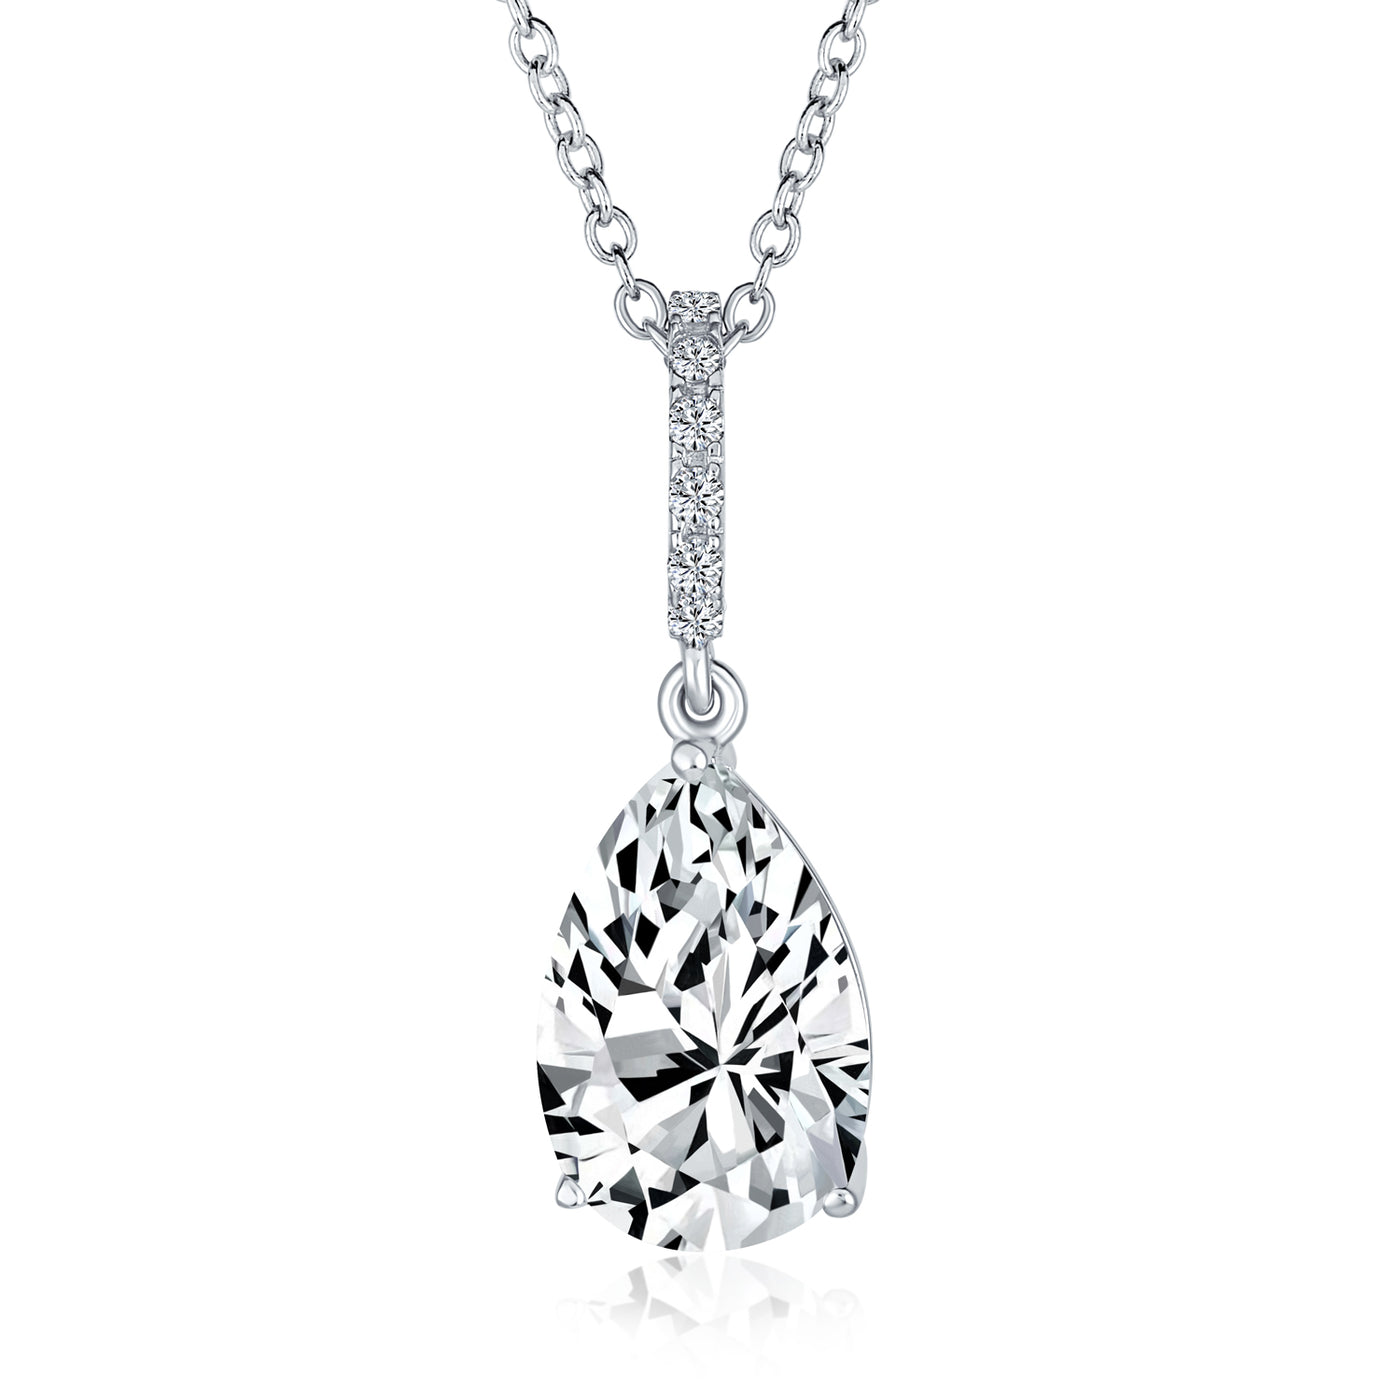 5CT Teardrop Shape Solitaire CZ Pendant Necklace Prom Sterling Silver